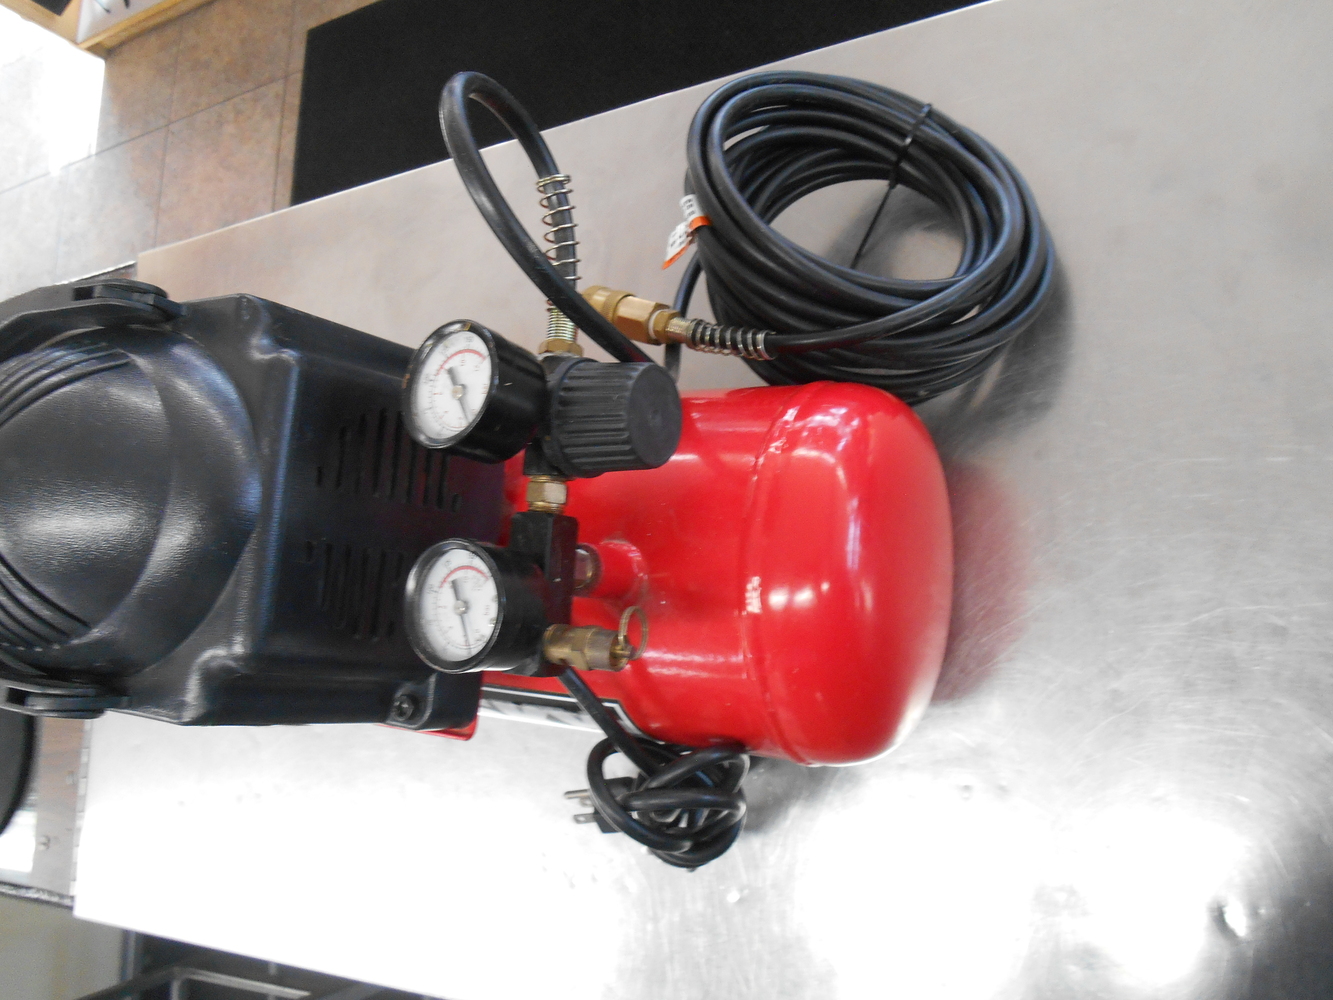 Husky 2 Gallon 100psi Compressor With Built In Air Hose.